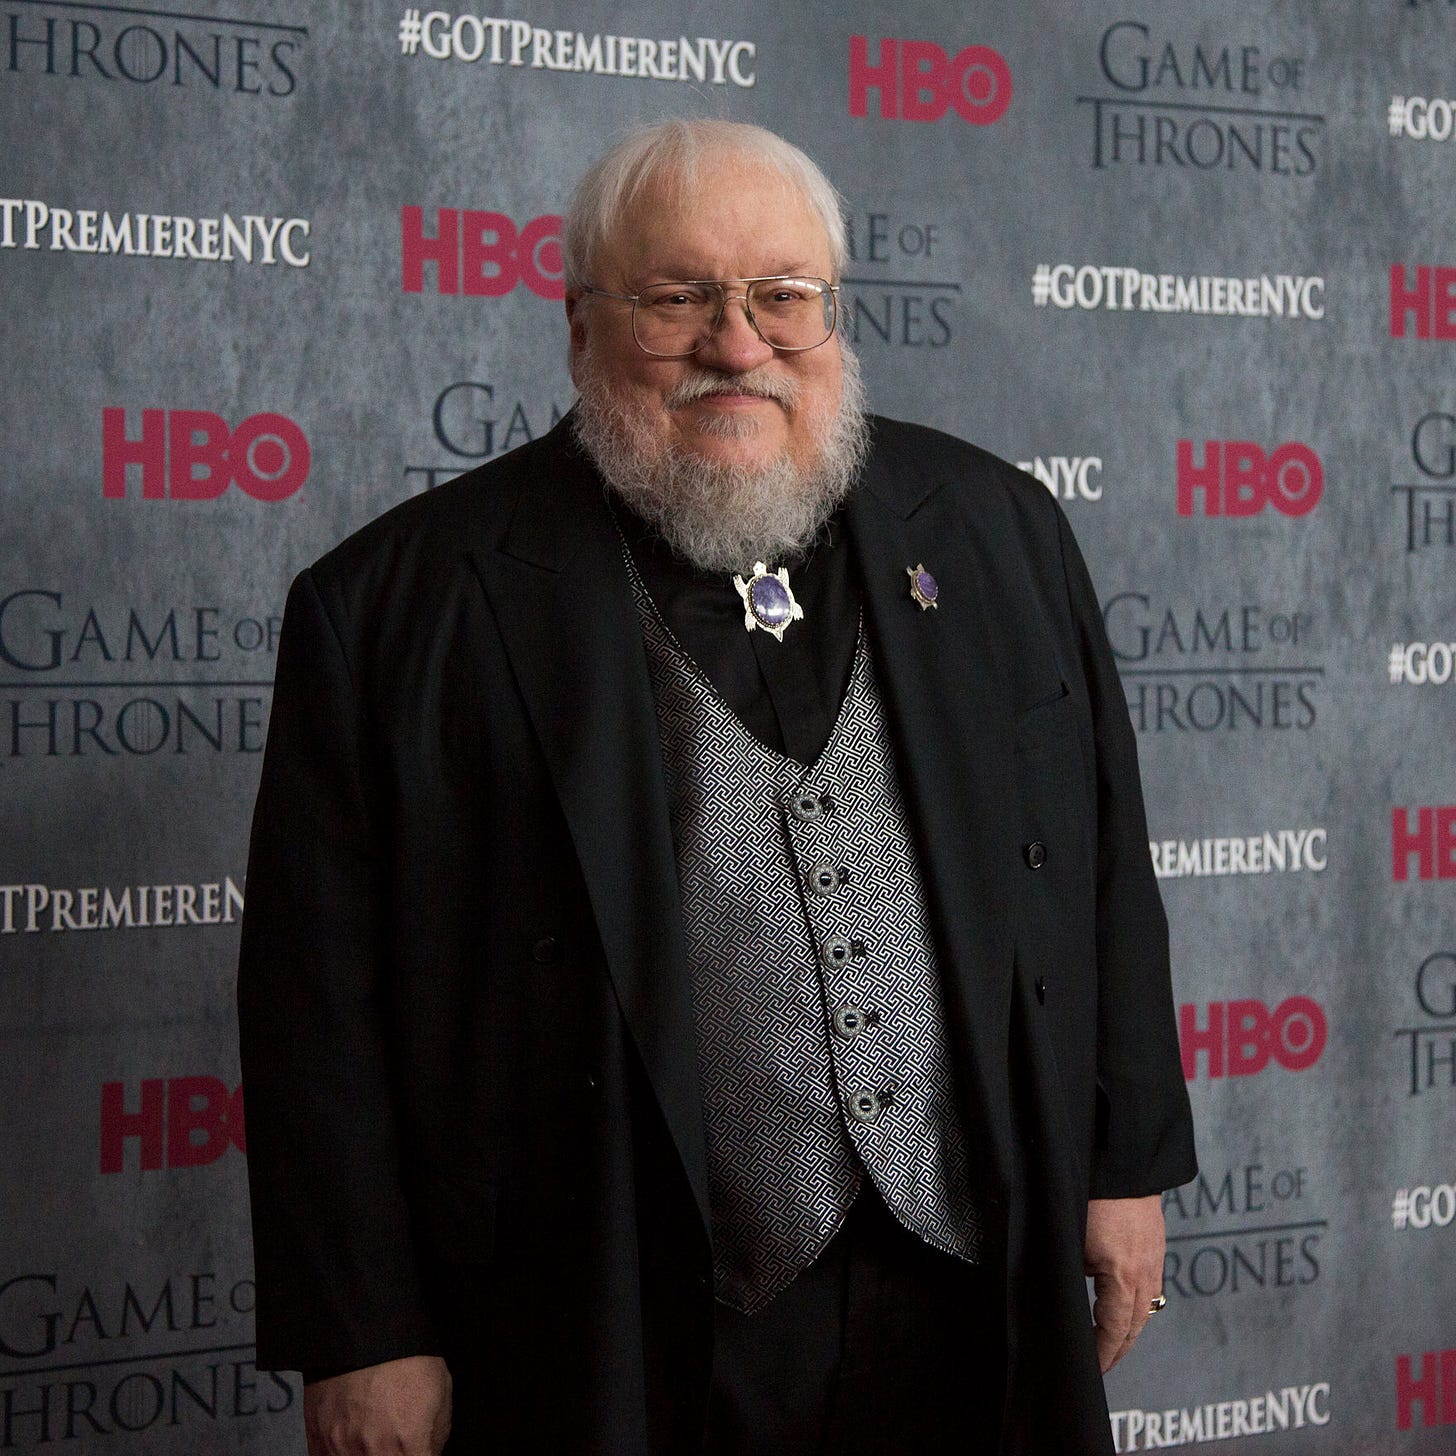 Game of Thrones' Book: George R. R. Martin Says He's Writing - The New York  Times